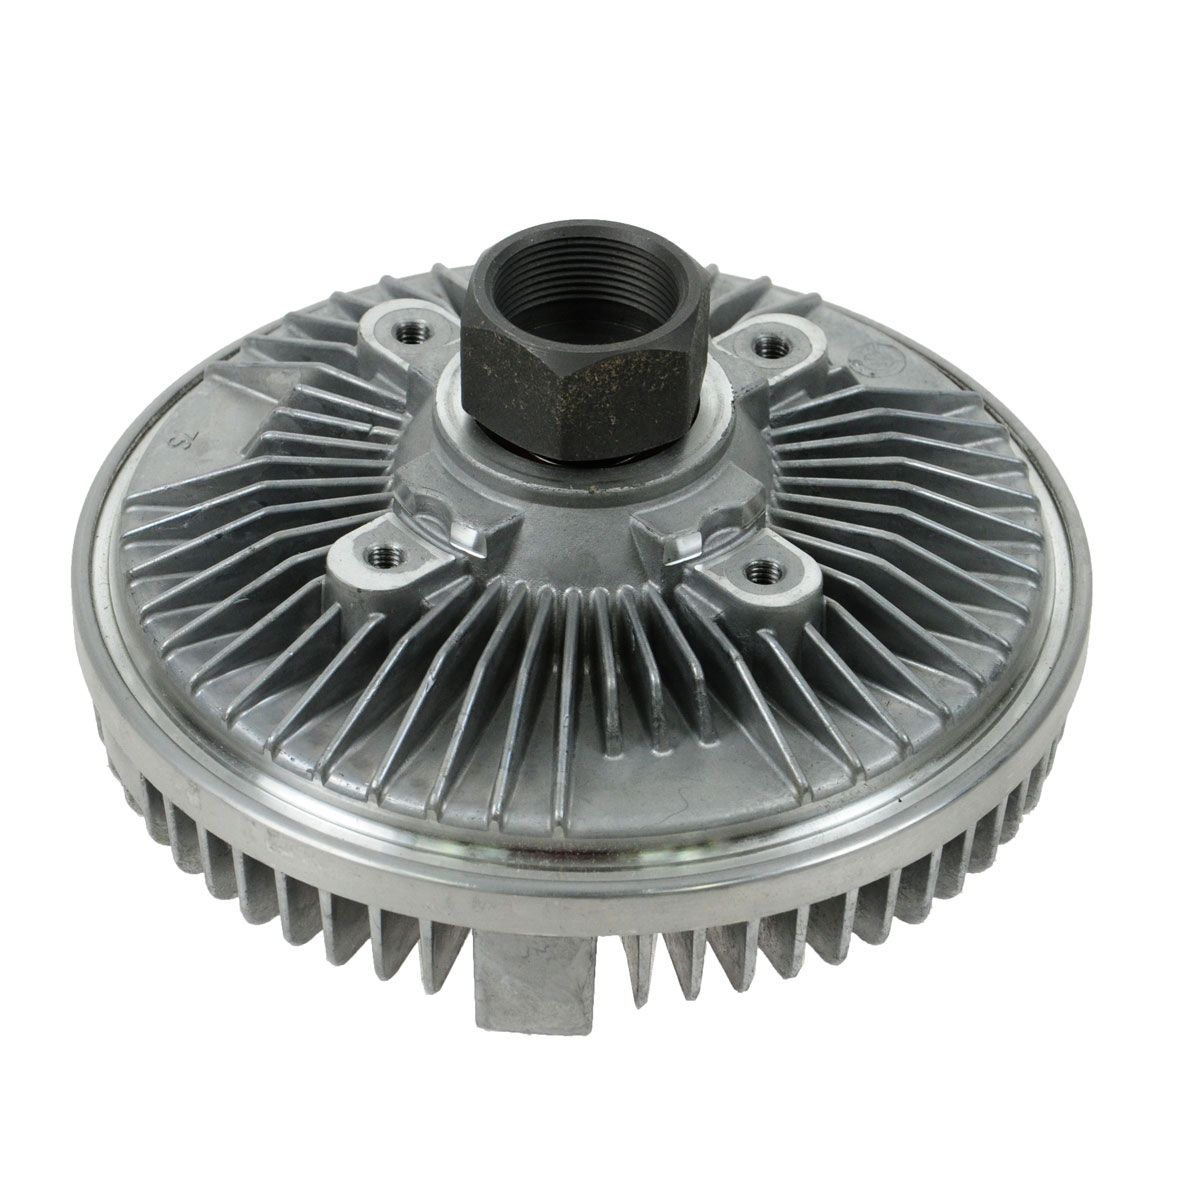 2002 Ford explorer fan clutch replacement